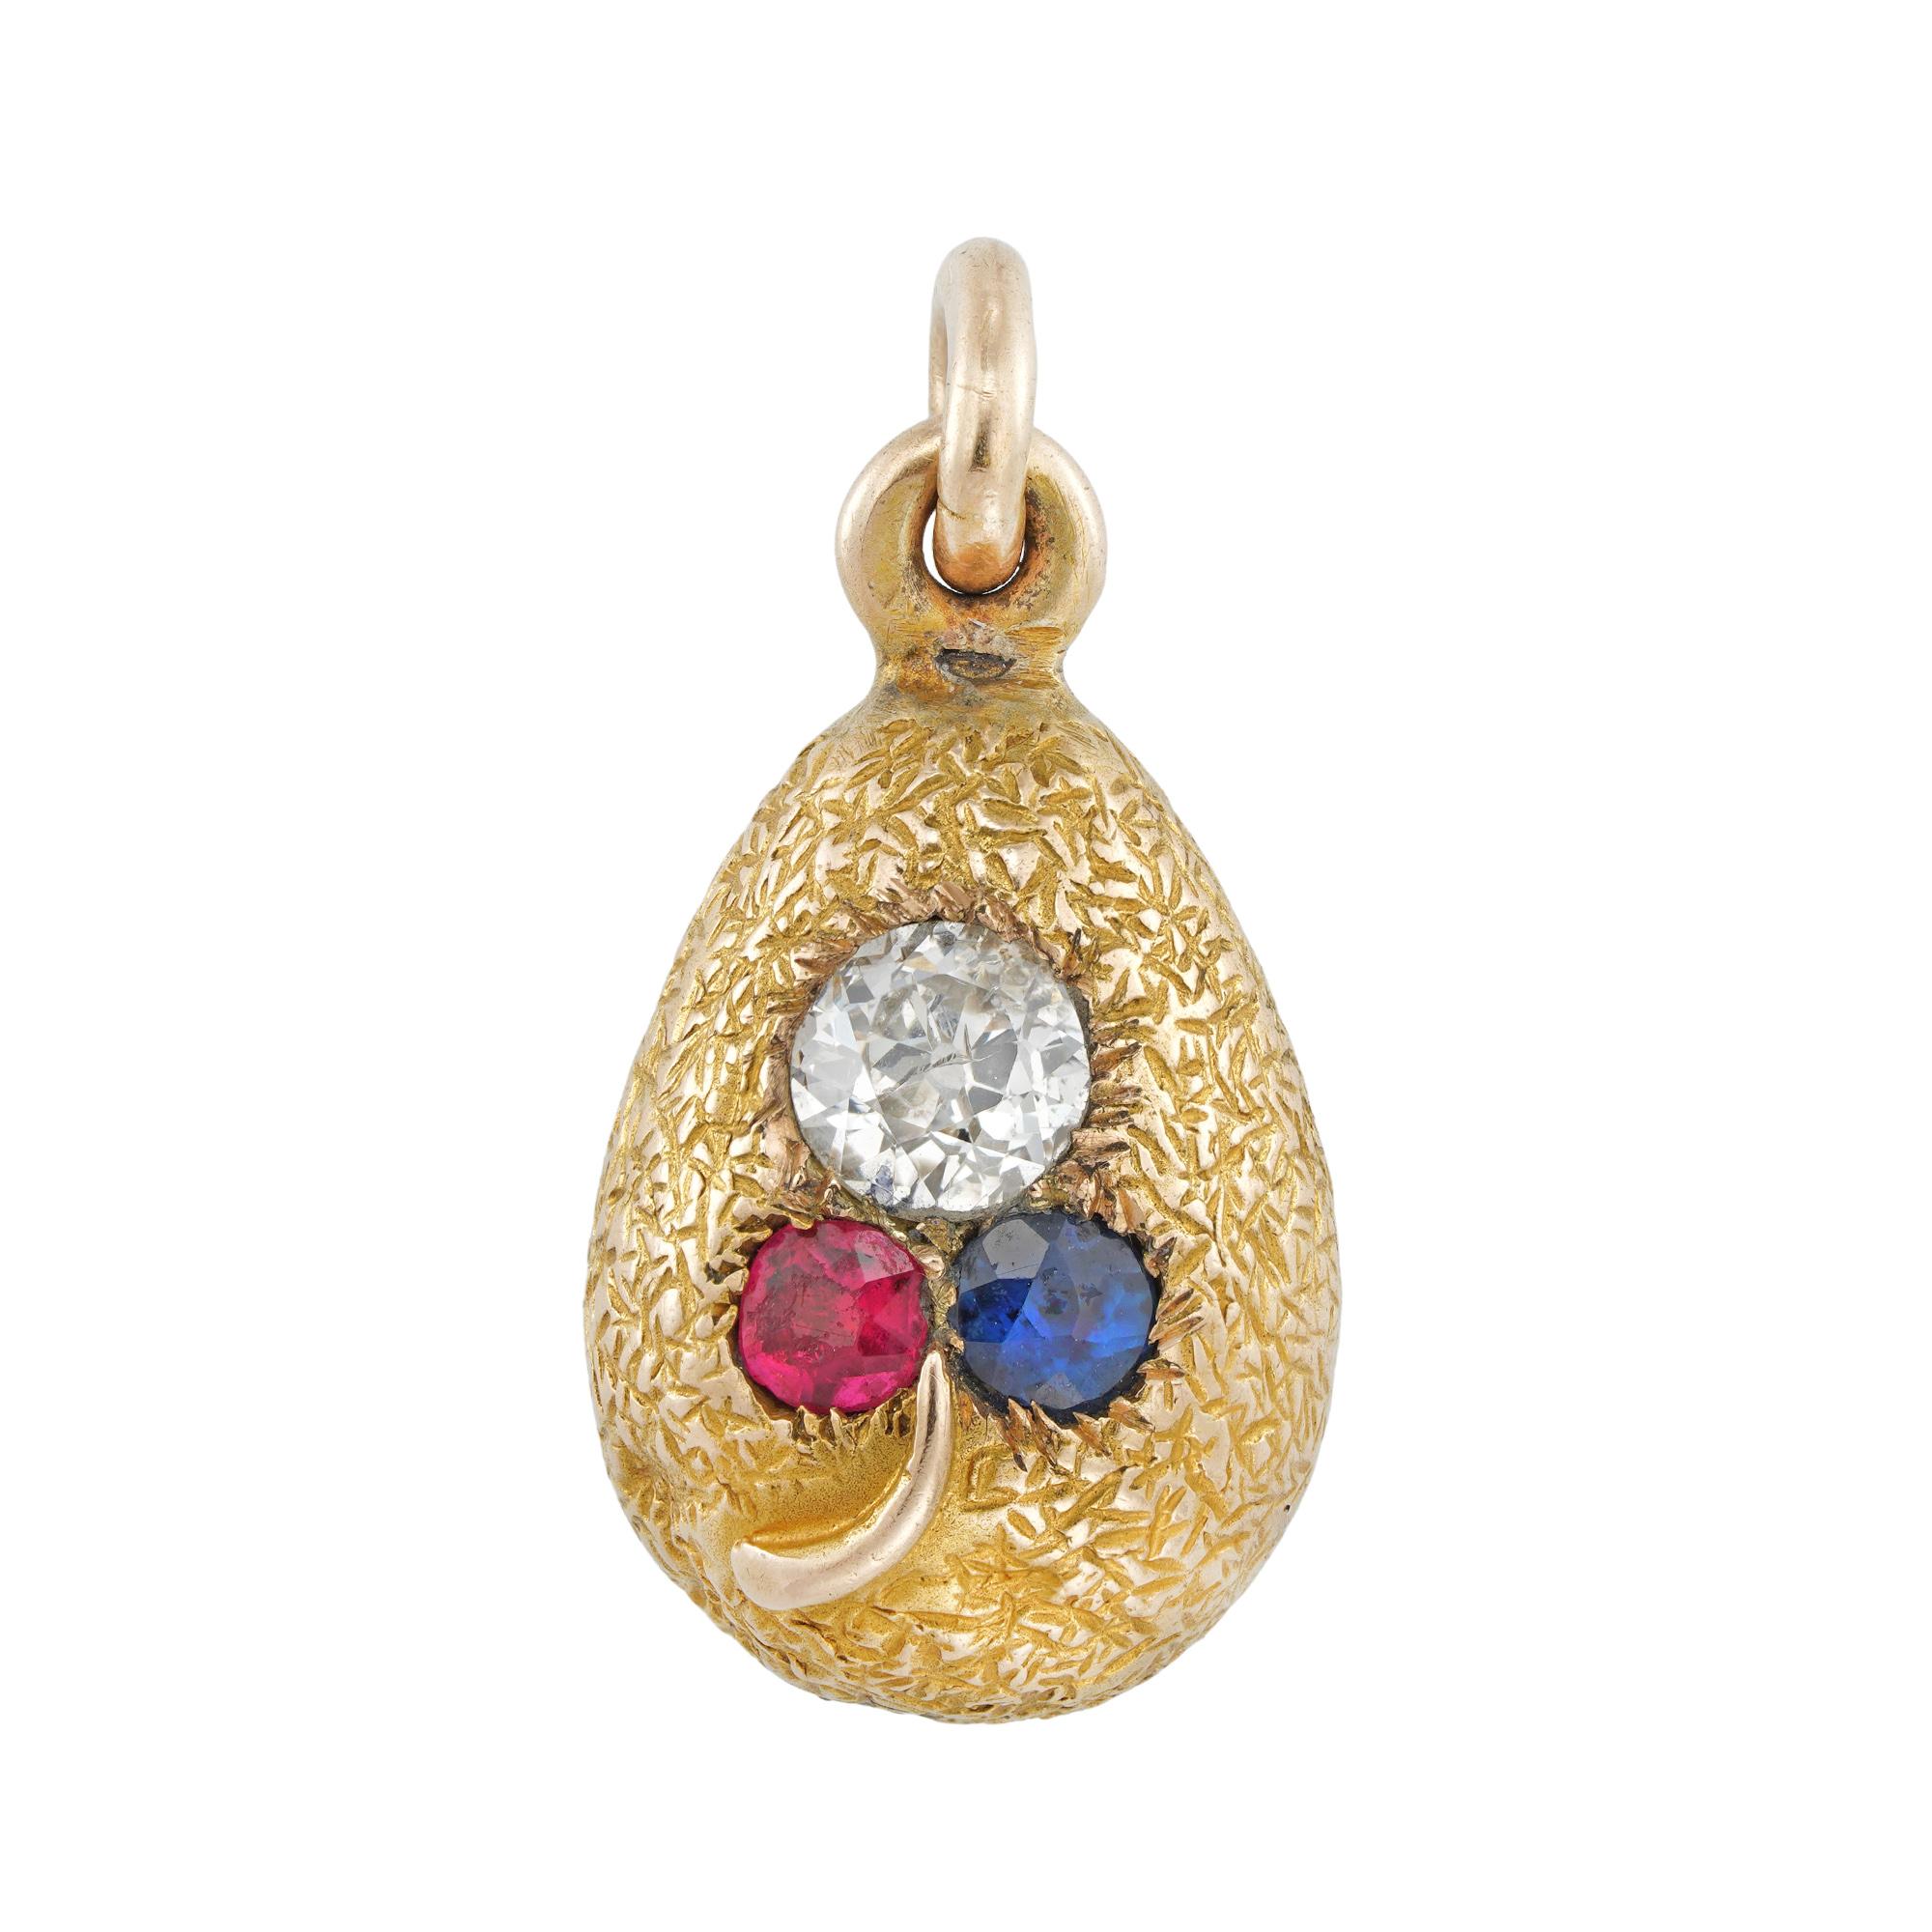 A Fabergé jewelled egg pendant, the yellow gold chased body mounted with an old-cut diamond estimated to weigh 0.3 carats, a round faceted ruby and a round faceted sapphire forming the leaves of a pansy with gold stem, suspended by a gold pendant